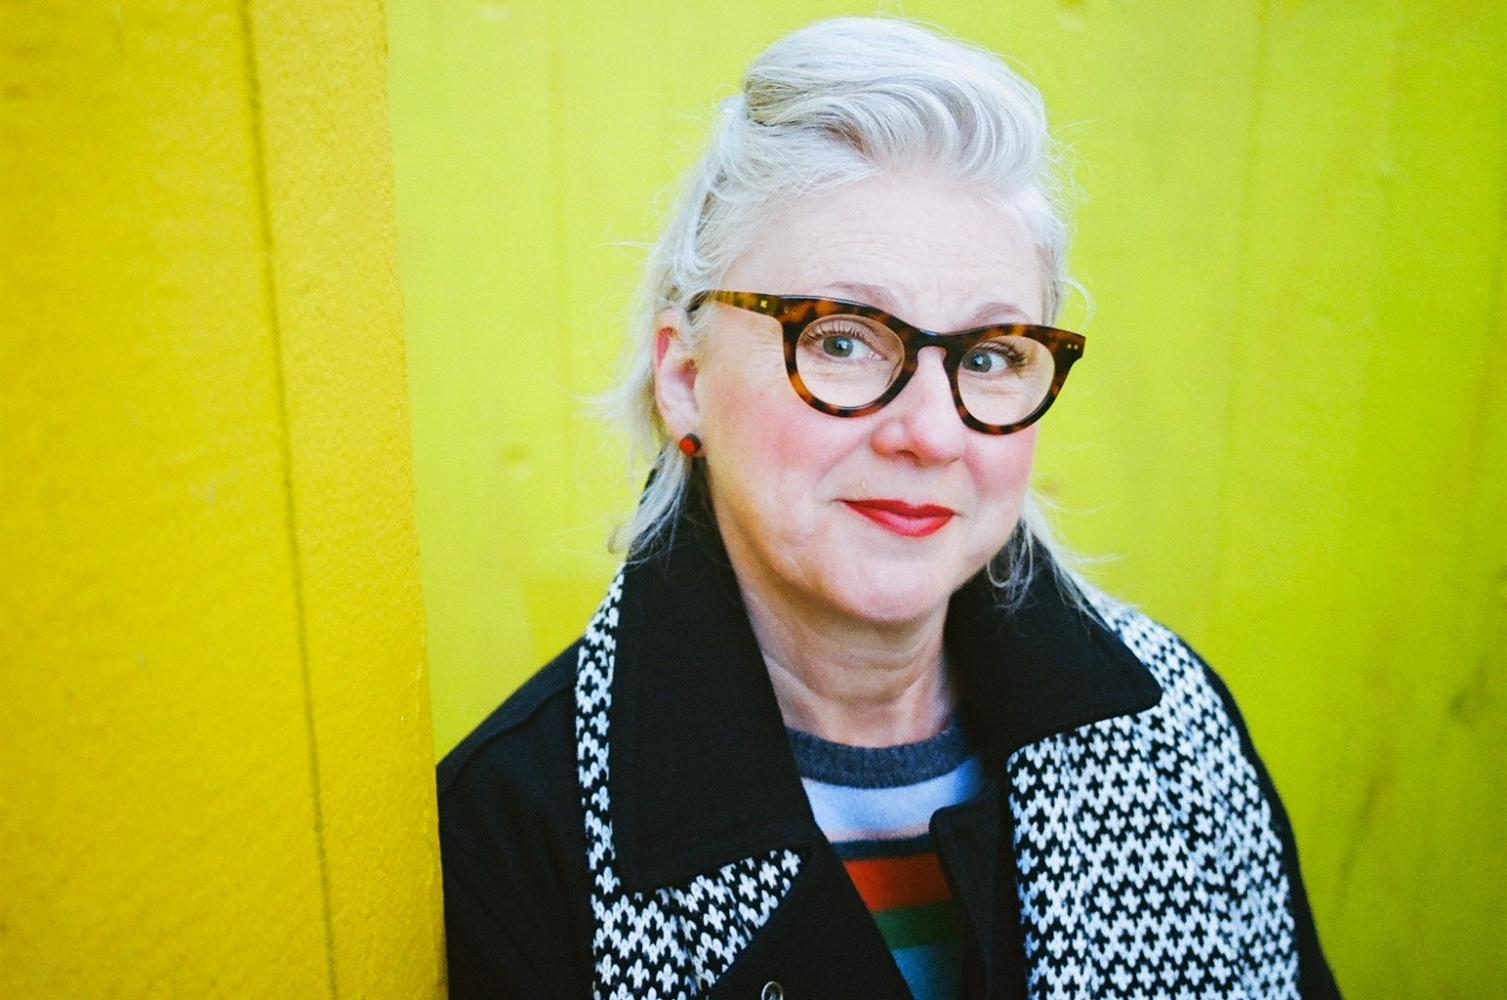 Karen McLeod, Perverse Verse guest, is a women with white hair, black framed glasses standing in front of a yellow background